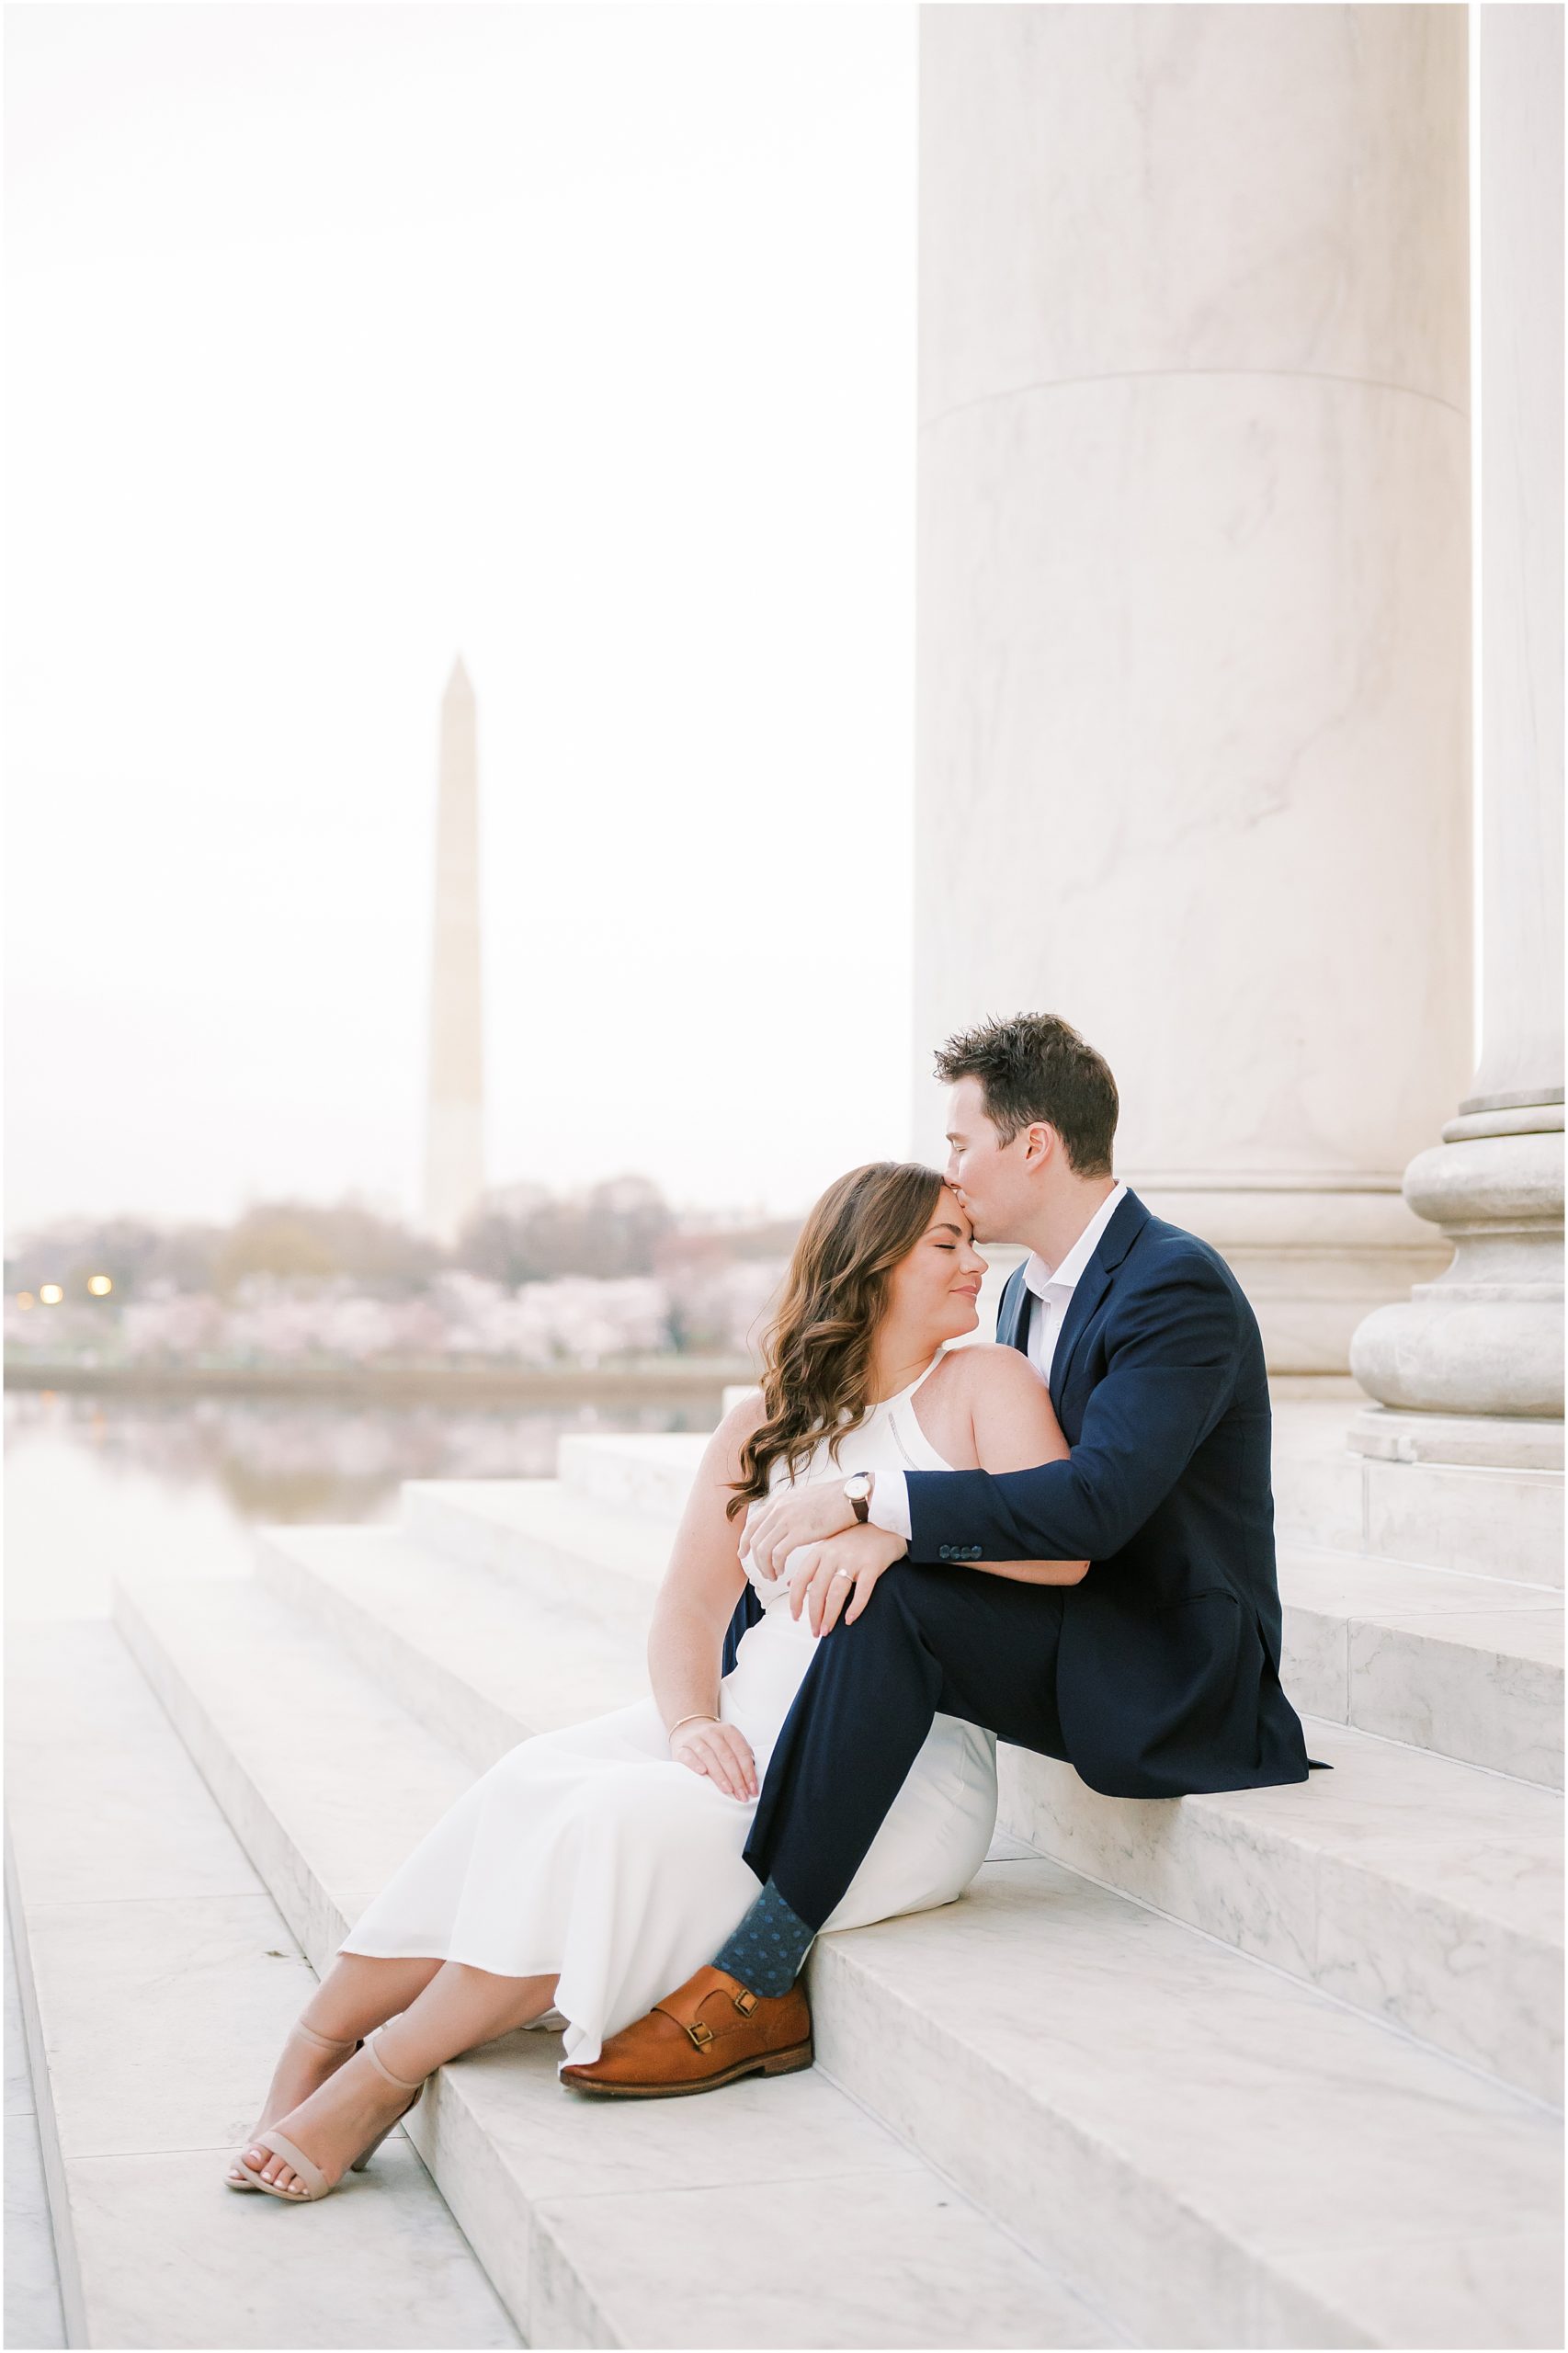 Couple sitting on steps at the Lincoln Memorial with the Washington Monument in the background